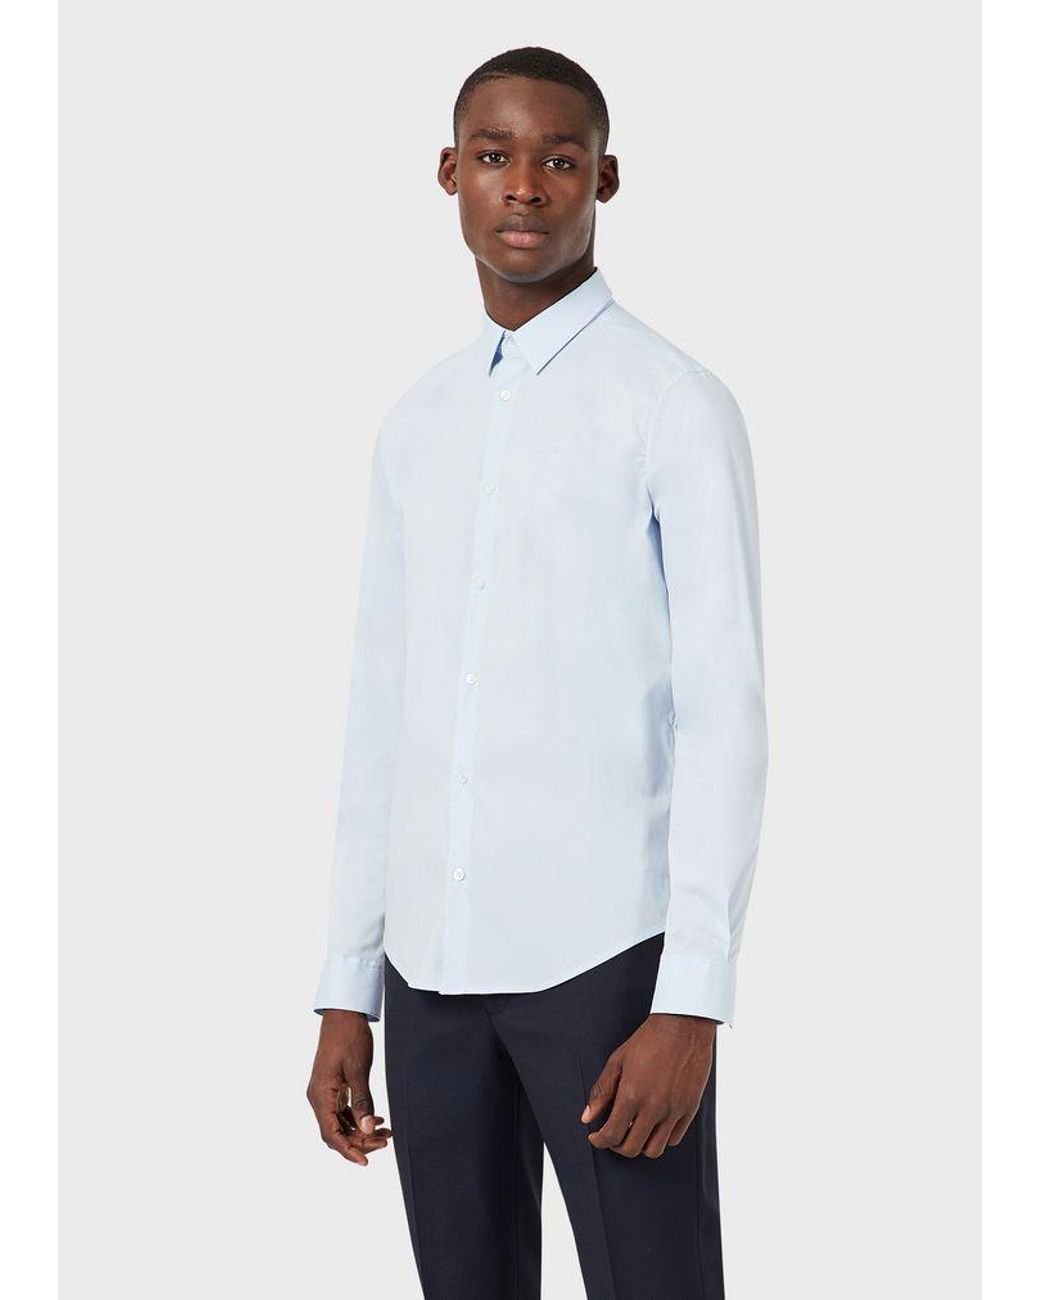 Emporio Armani Cotton Casual Shirt in Azure (Blue) for Men - Lyst